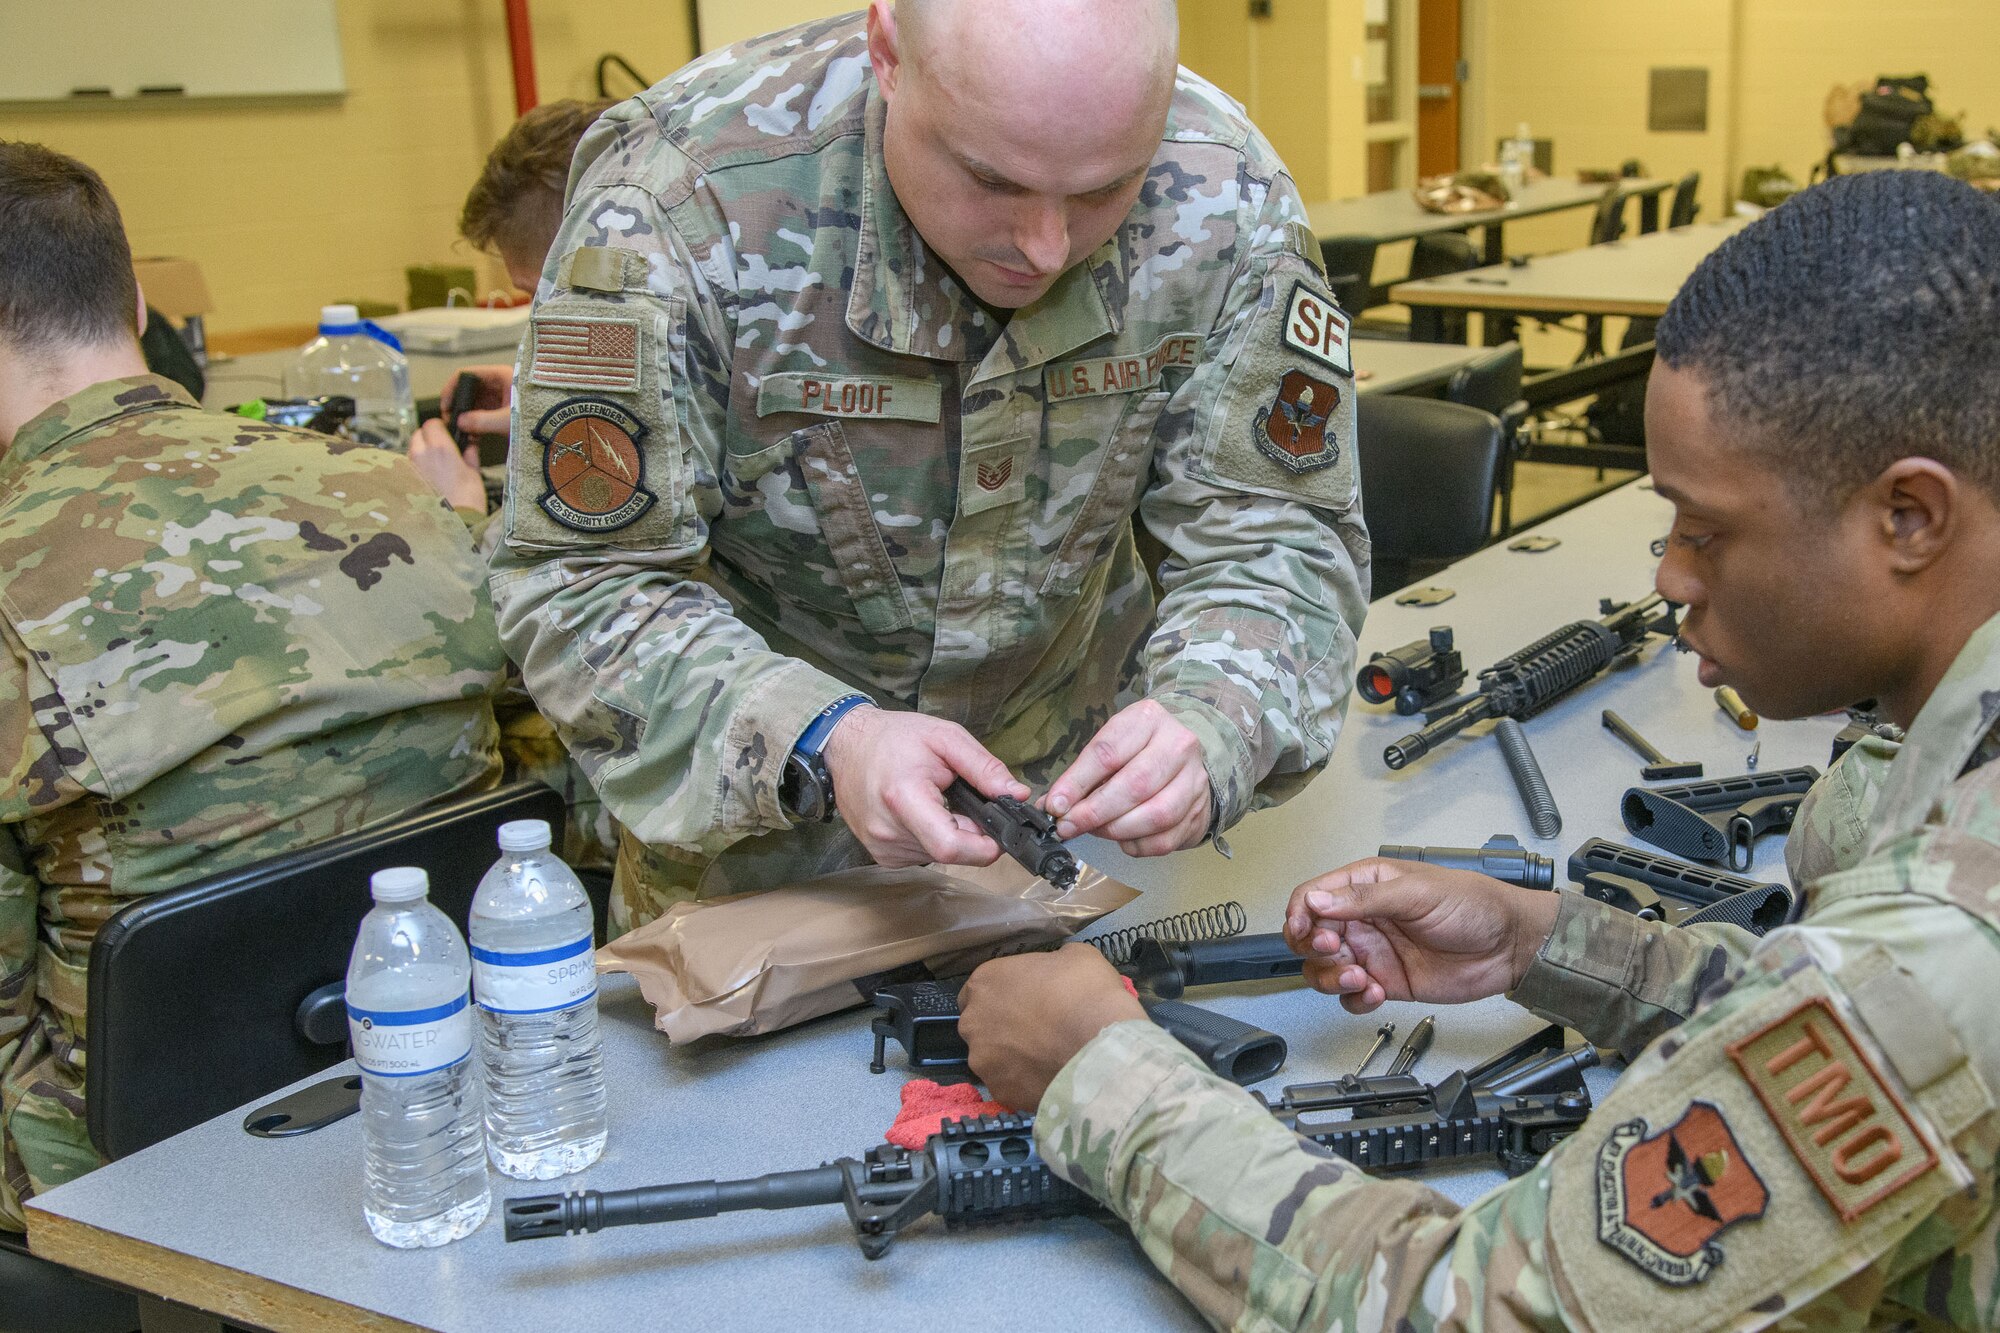 Tech. Sgt. Brian Ploof, shows an airman how to reconstruct a weapon at Maxwell Air Force Base, December 6, 2022. The 42nd Mission Support Group hosted a Readiness Reset Exercise in which a small team of Airmen from across the base participated in rigorous combat scenarios in a three day event.